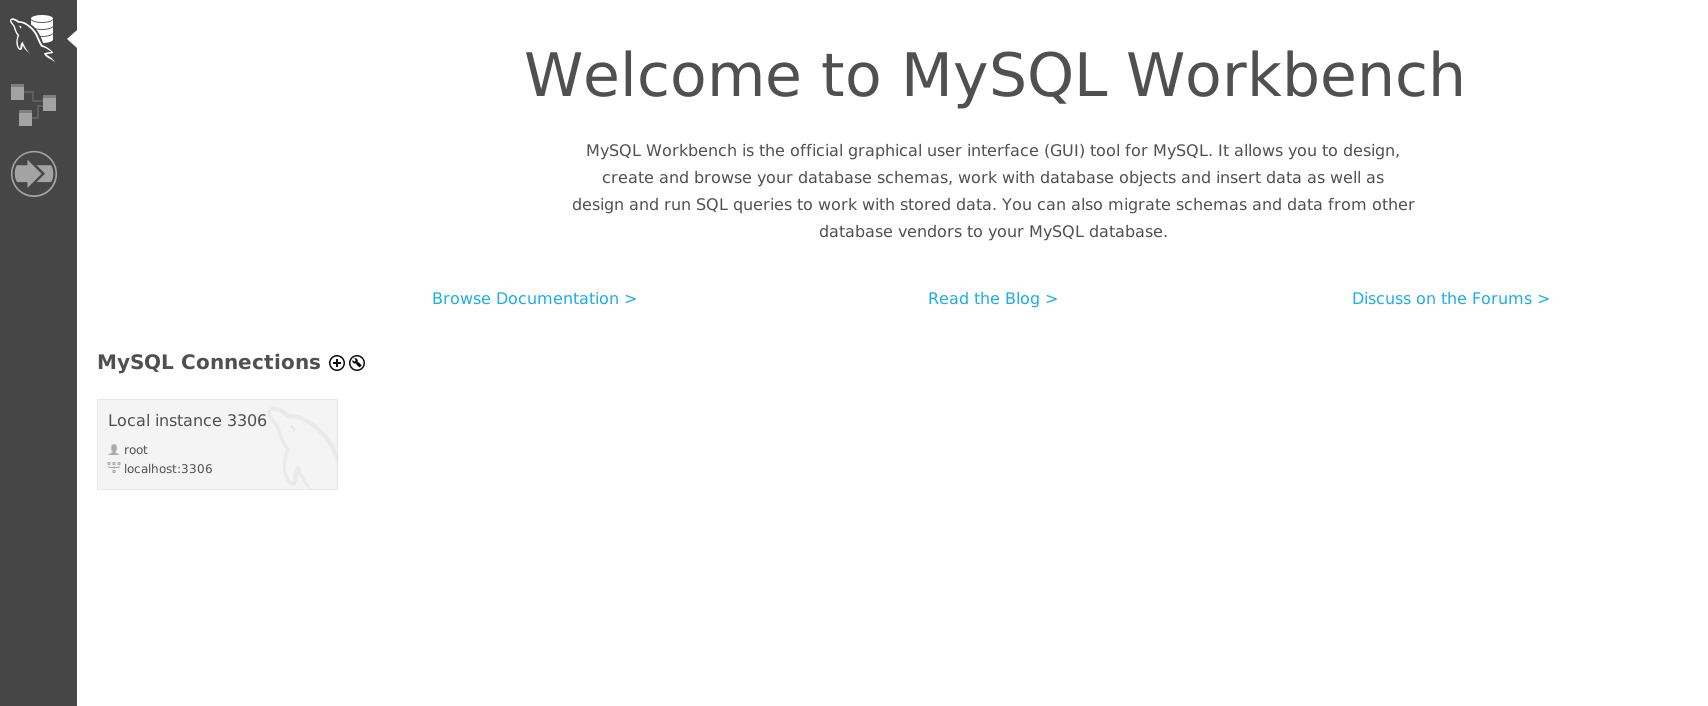 Viewing MySQL Workbench’s welcome page